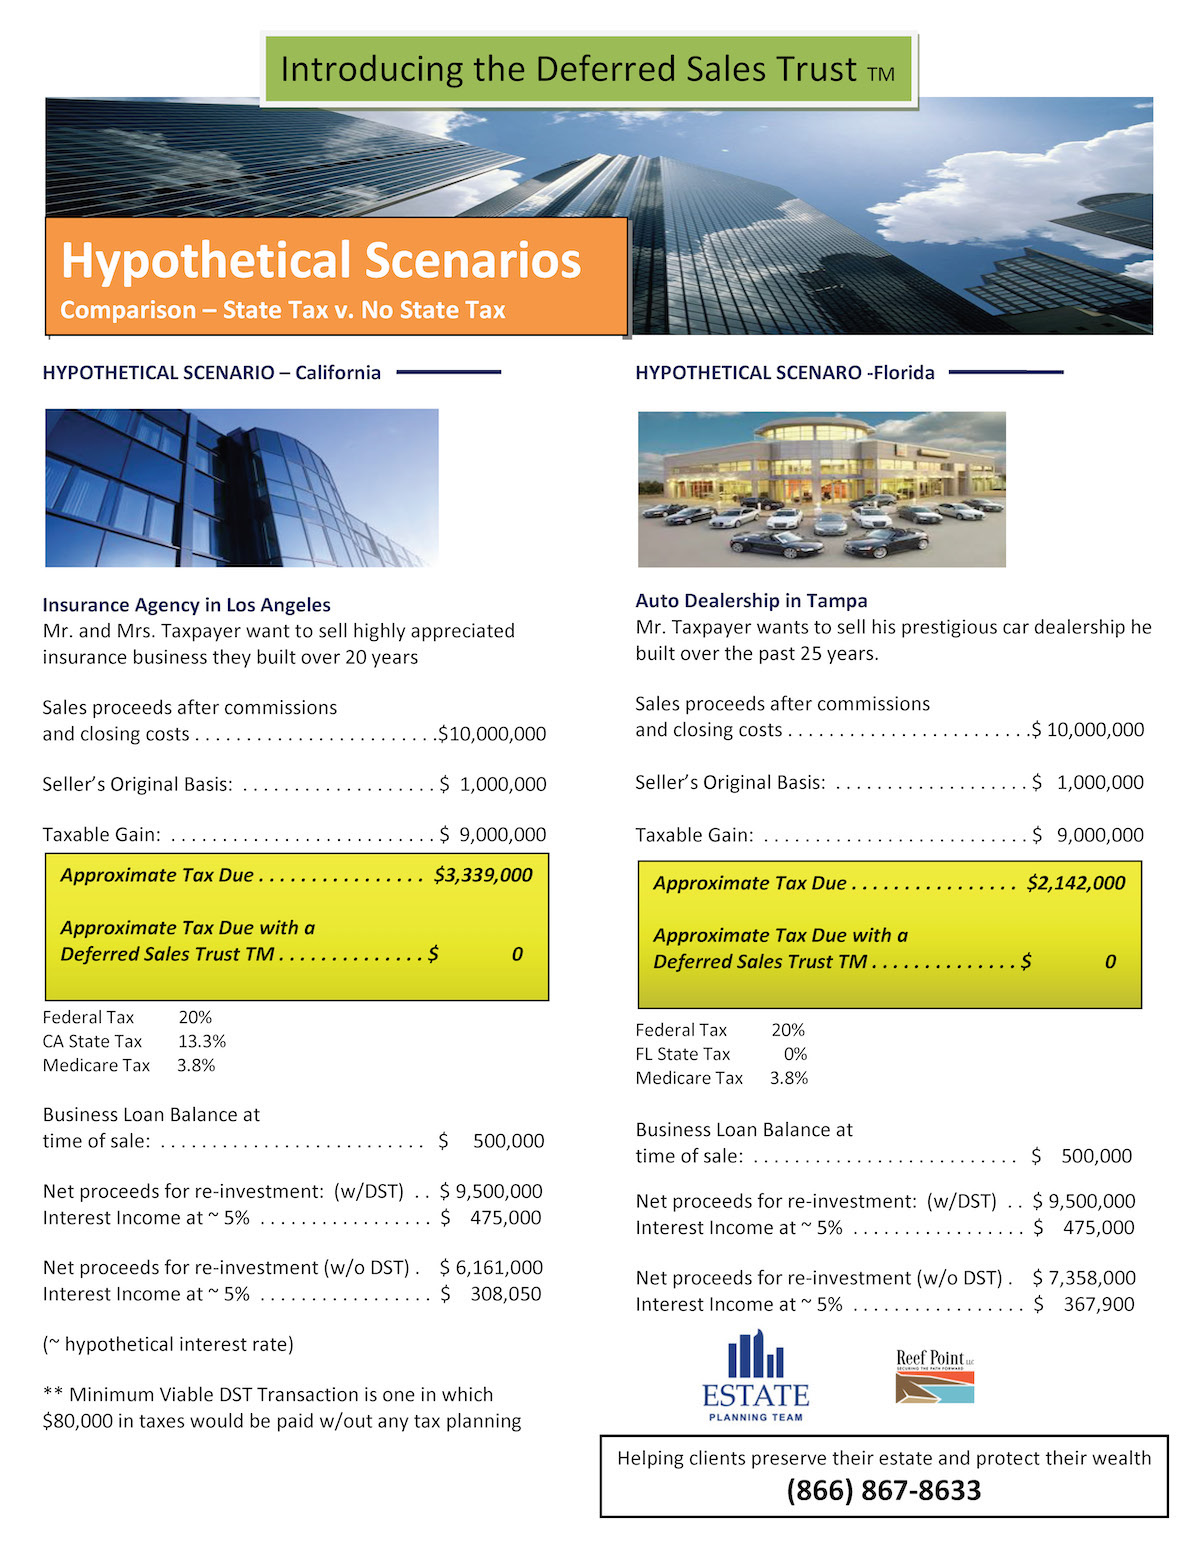 A flyer featuring a building and highlighting the effectiveness of Deferred Sales Trust as a Business Exit Strategy for minimizing capital gain taxes.